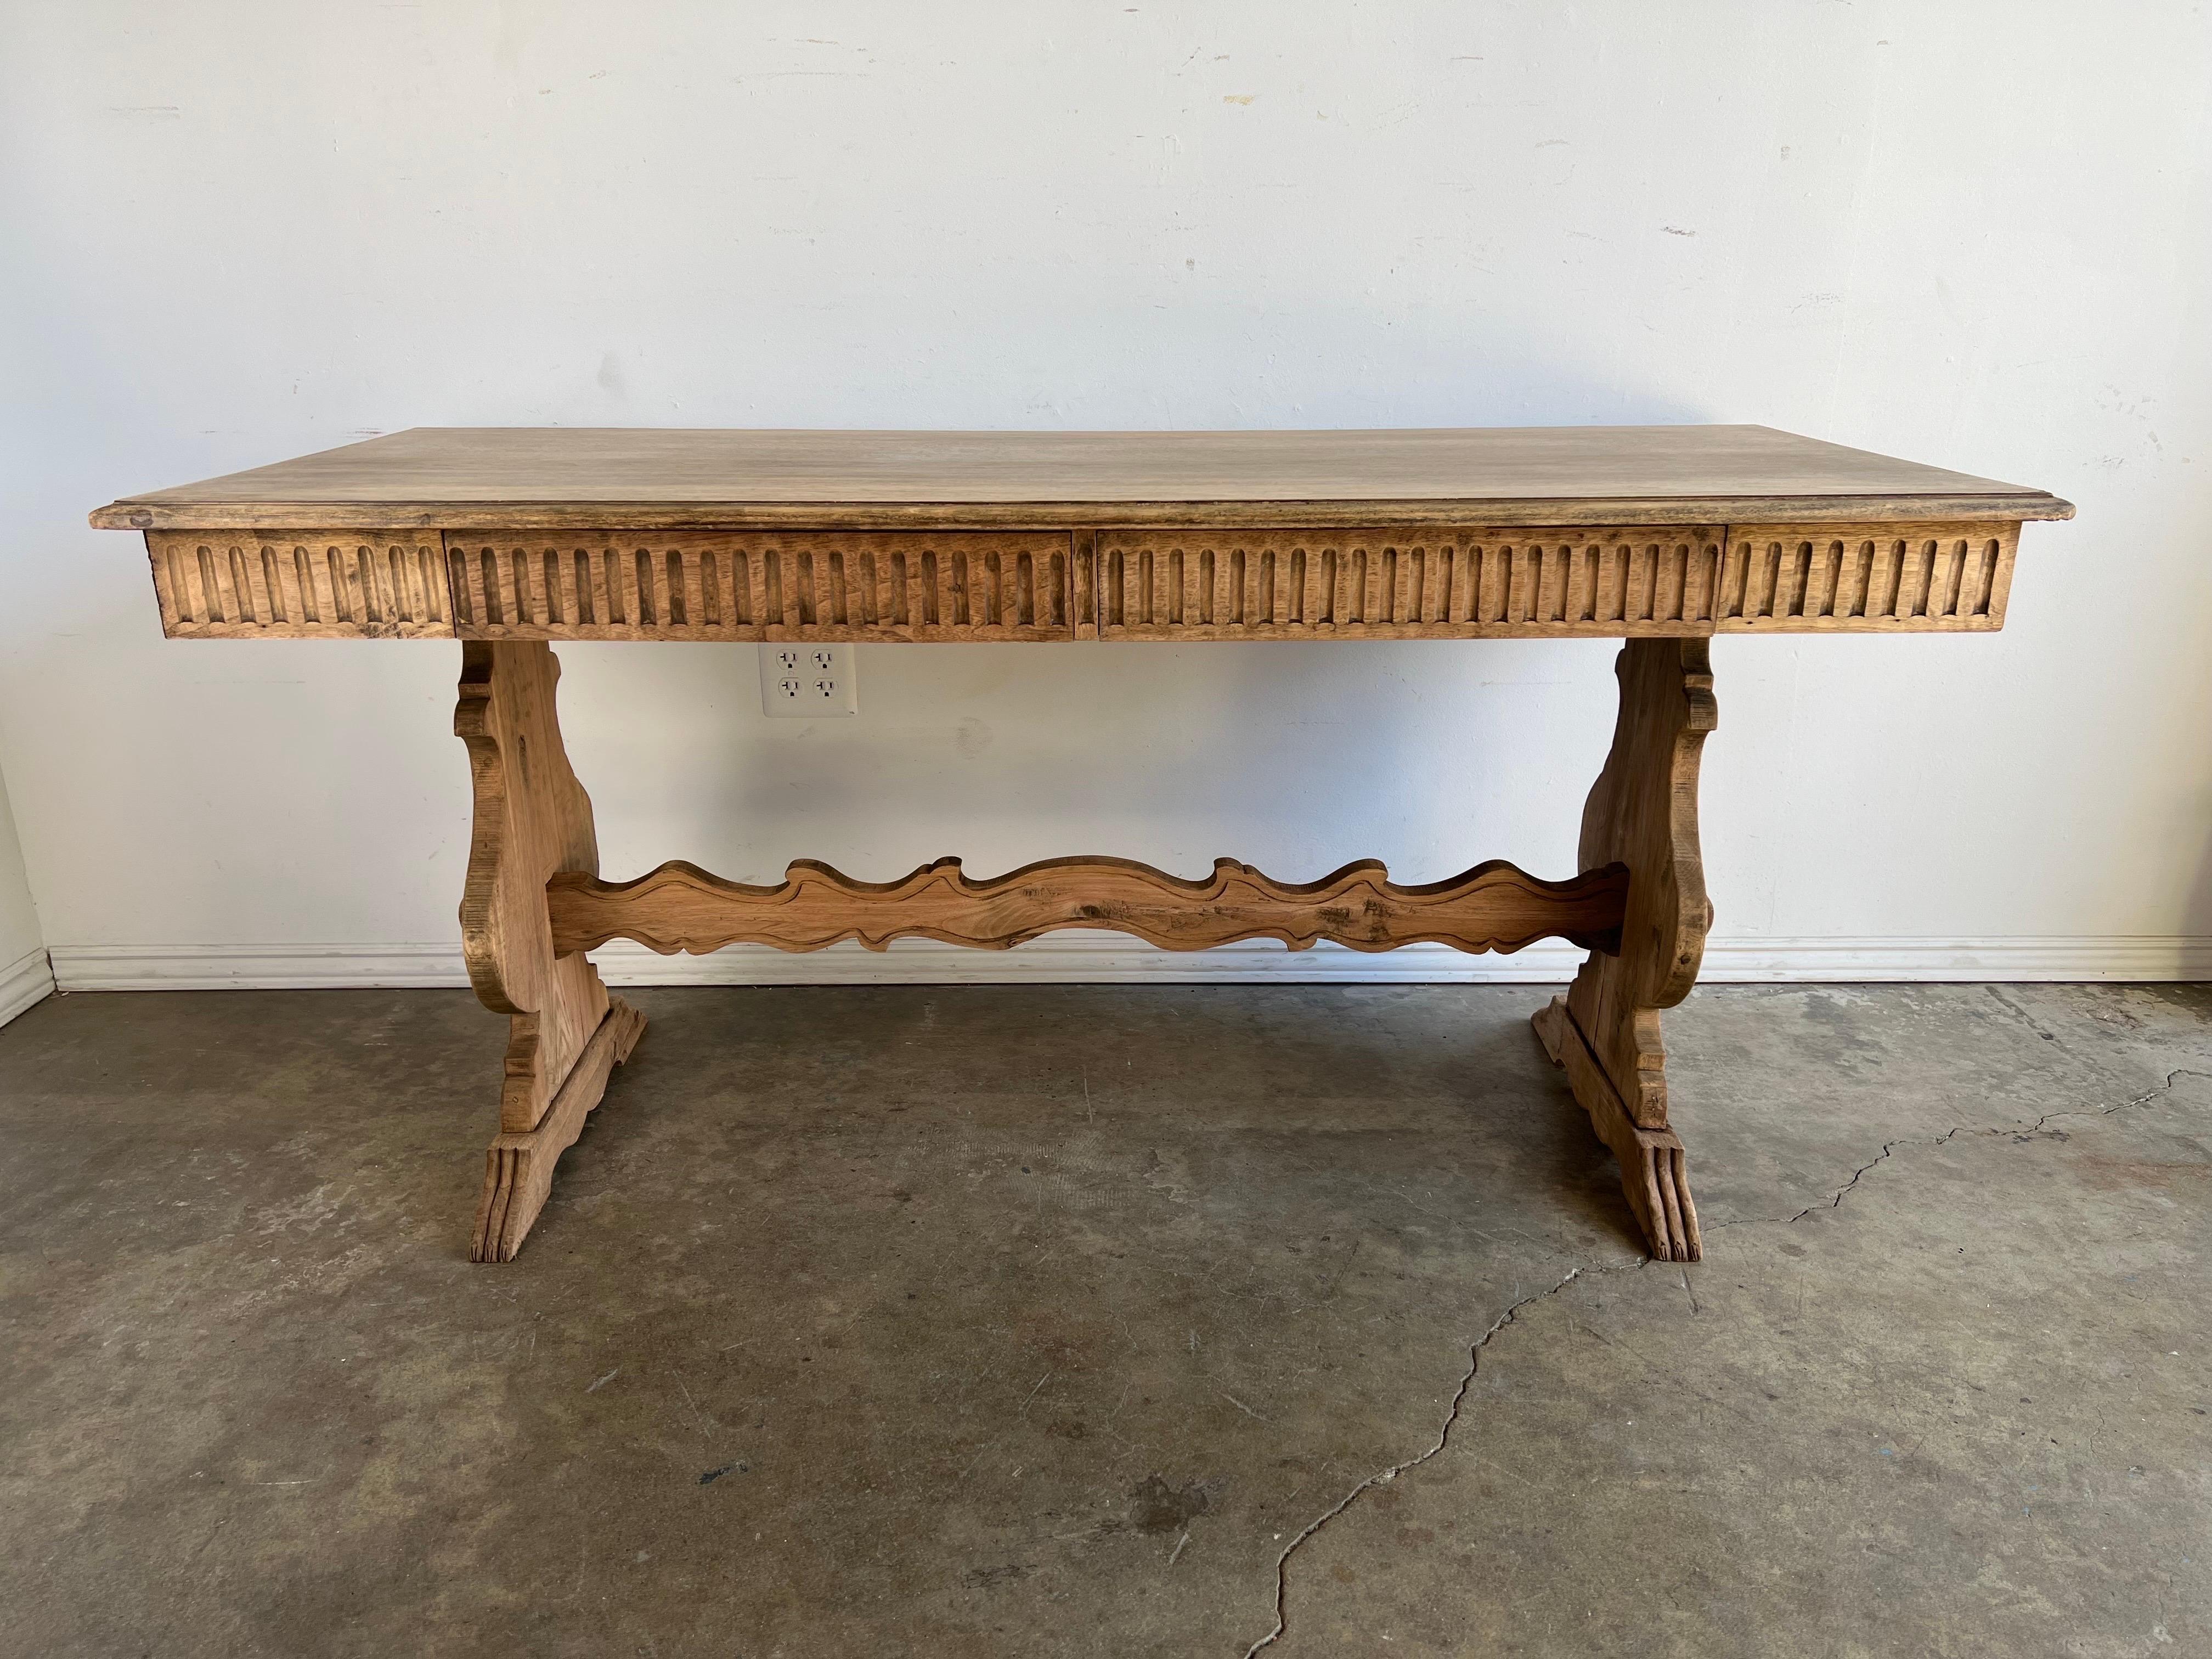 19th C. bleached Refractory Italian desk with (2) drawers. The walnut has been lightened. A scalloped bottom stretcher connects two lyre shaped pedestals. Beautiful worn, distressed finish.